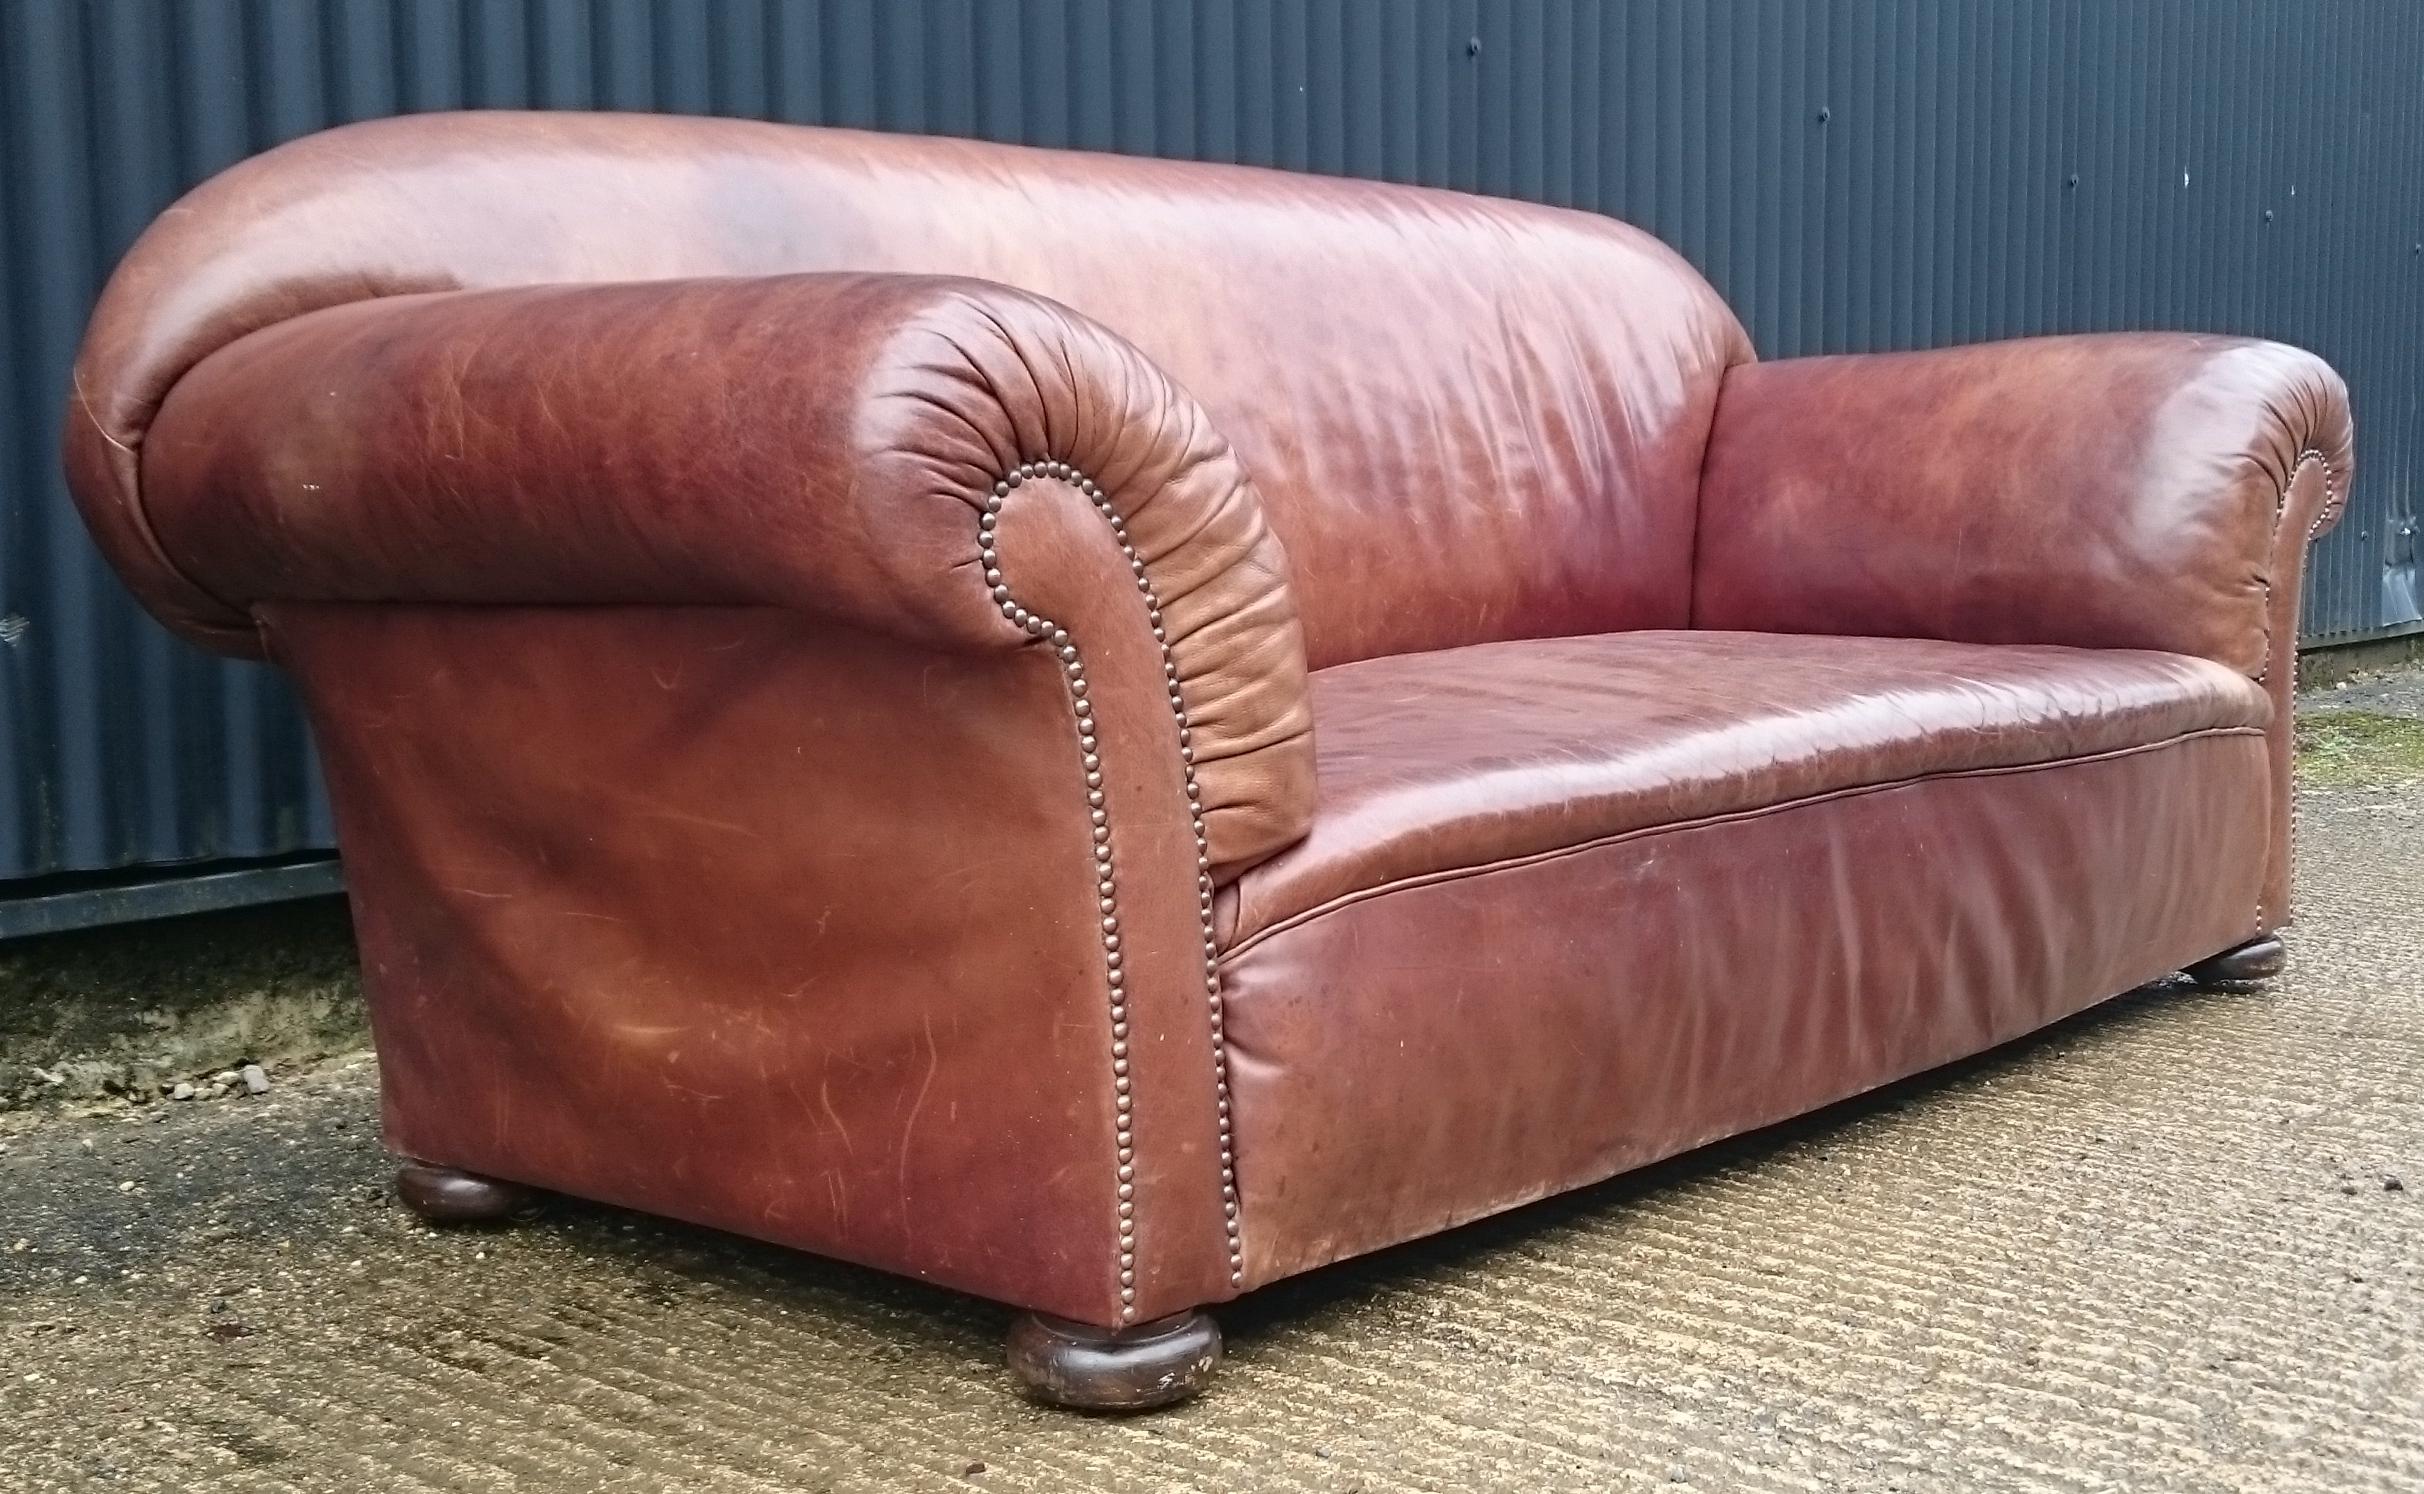 Grand scale 19th century sofa upholstered in leather standing on turned bun feet with brass casters, the back, seat and arms all upholstered in sprung horsehair. The sofa was upholstered in Alma 